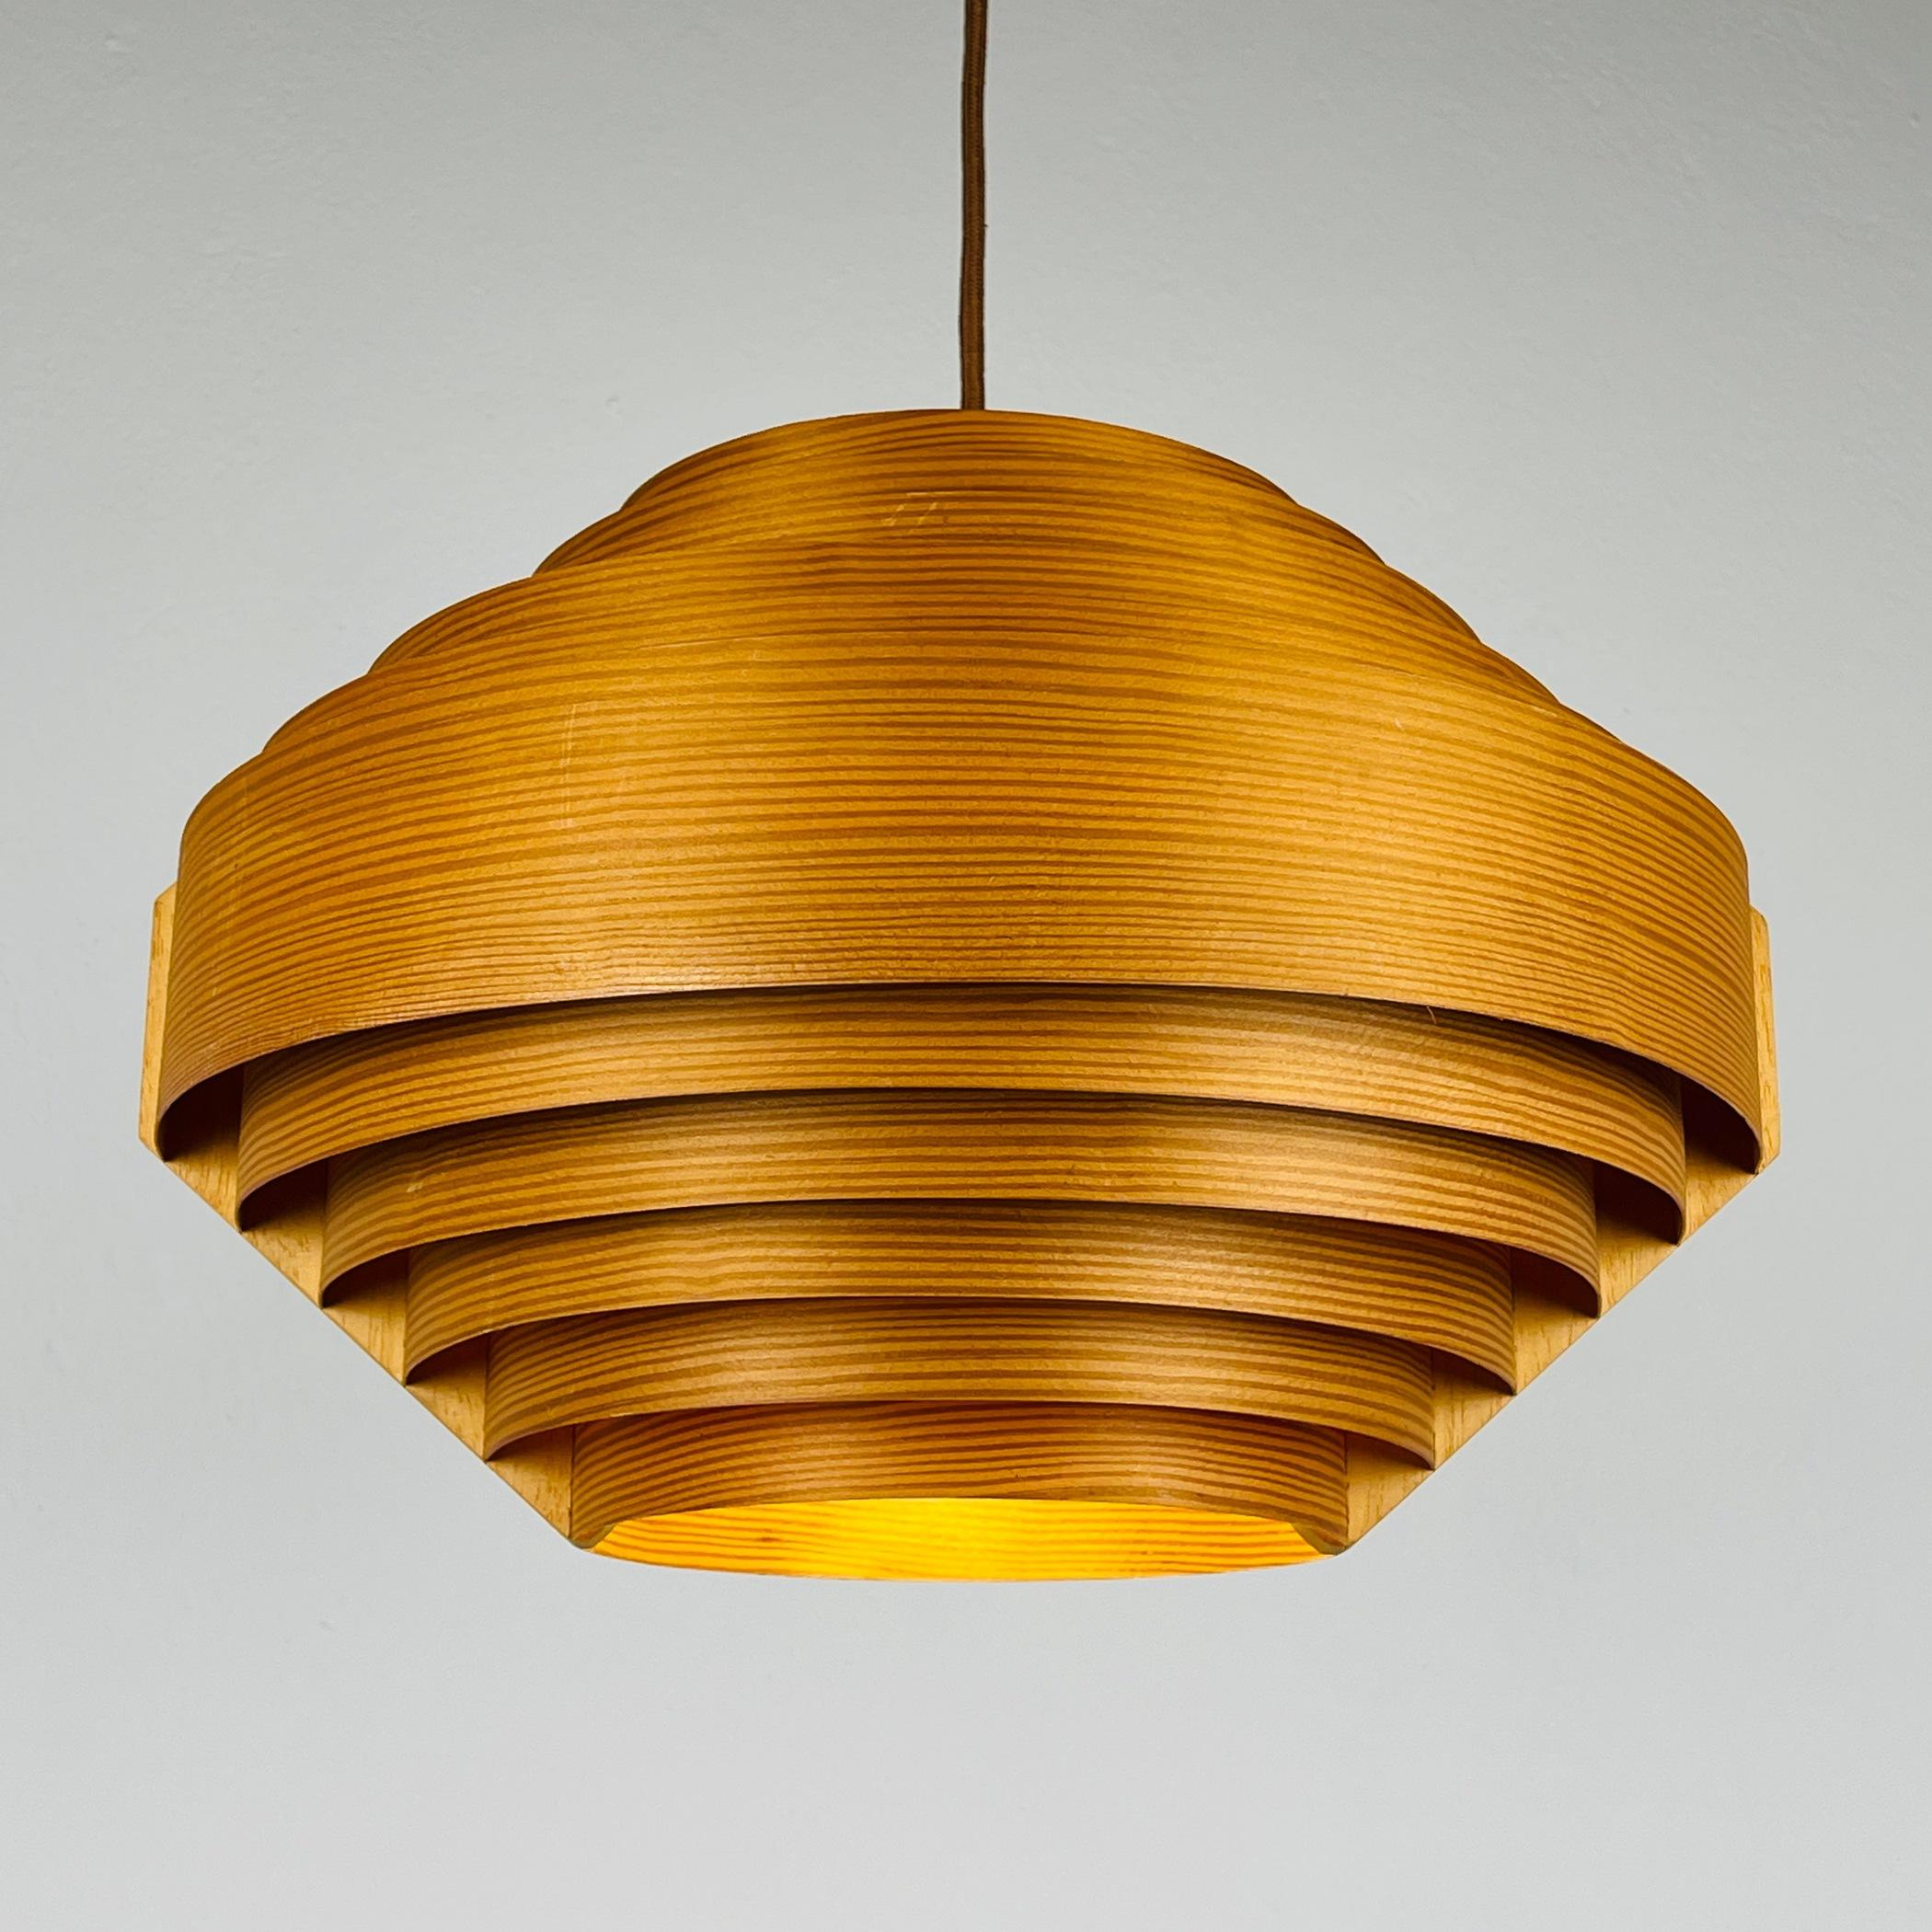 Transport your space to the 1960s with this exquisite wooden pendant lamp by Hans-Agne Jakobsson, crafted for AB Ellysett in Markaryd, Sweden. Hans-Agne Jakobsson, renowned for his pine veneer lamps, meticulously crafted thin strips of pine wood